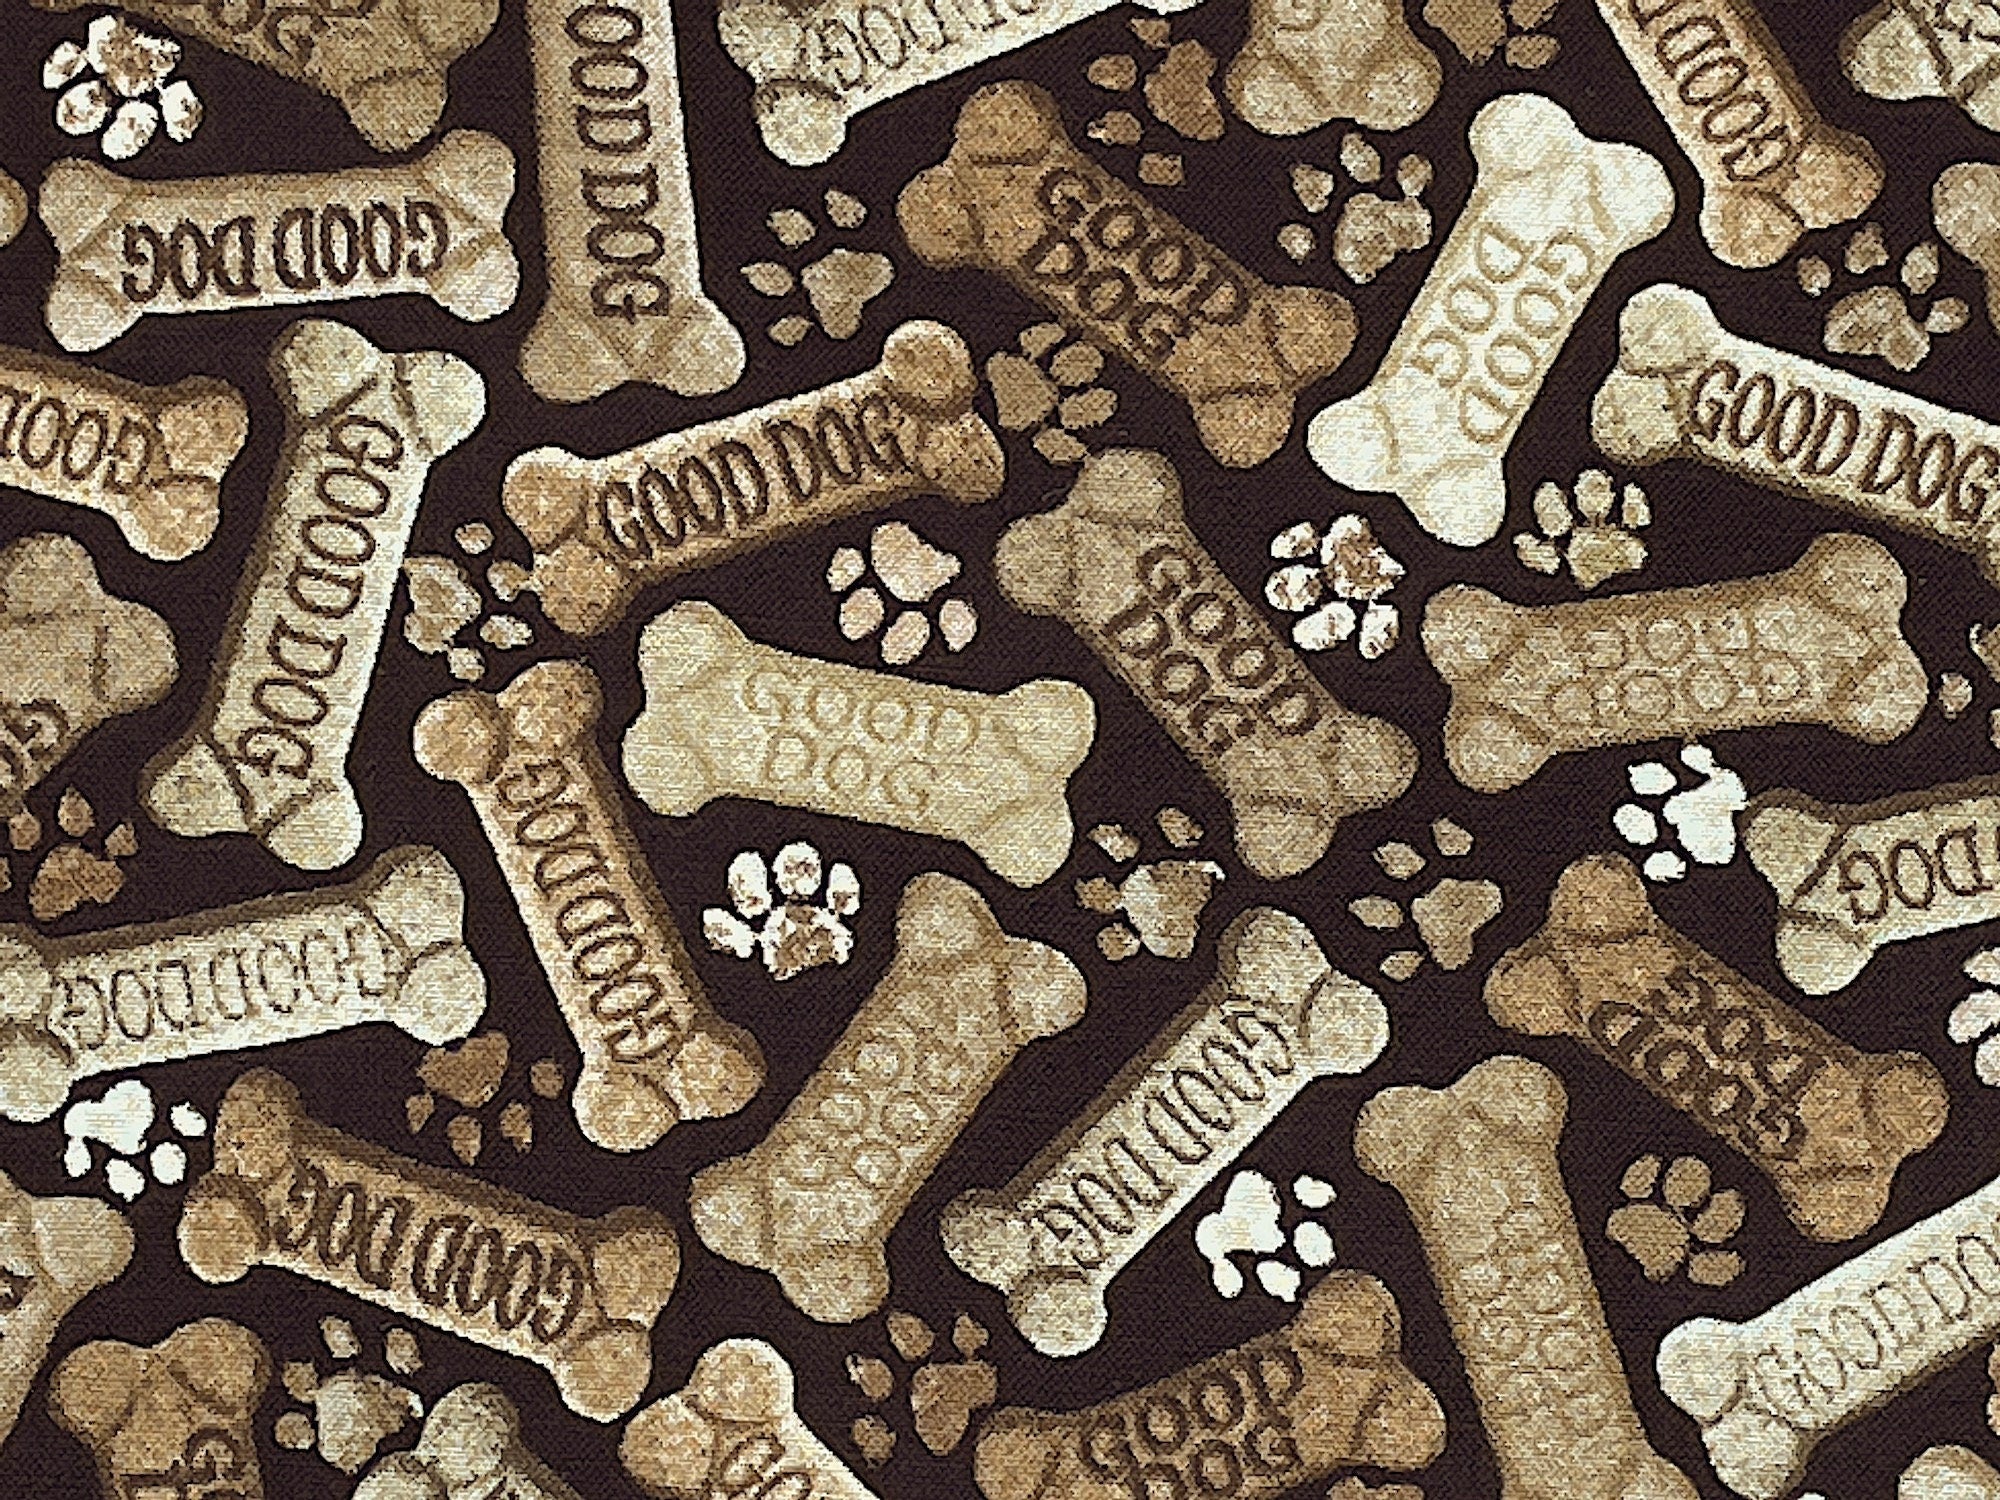 Close up of dog bones that have the saying good dog on them